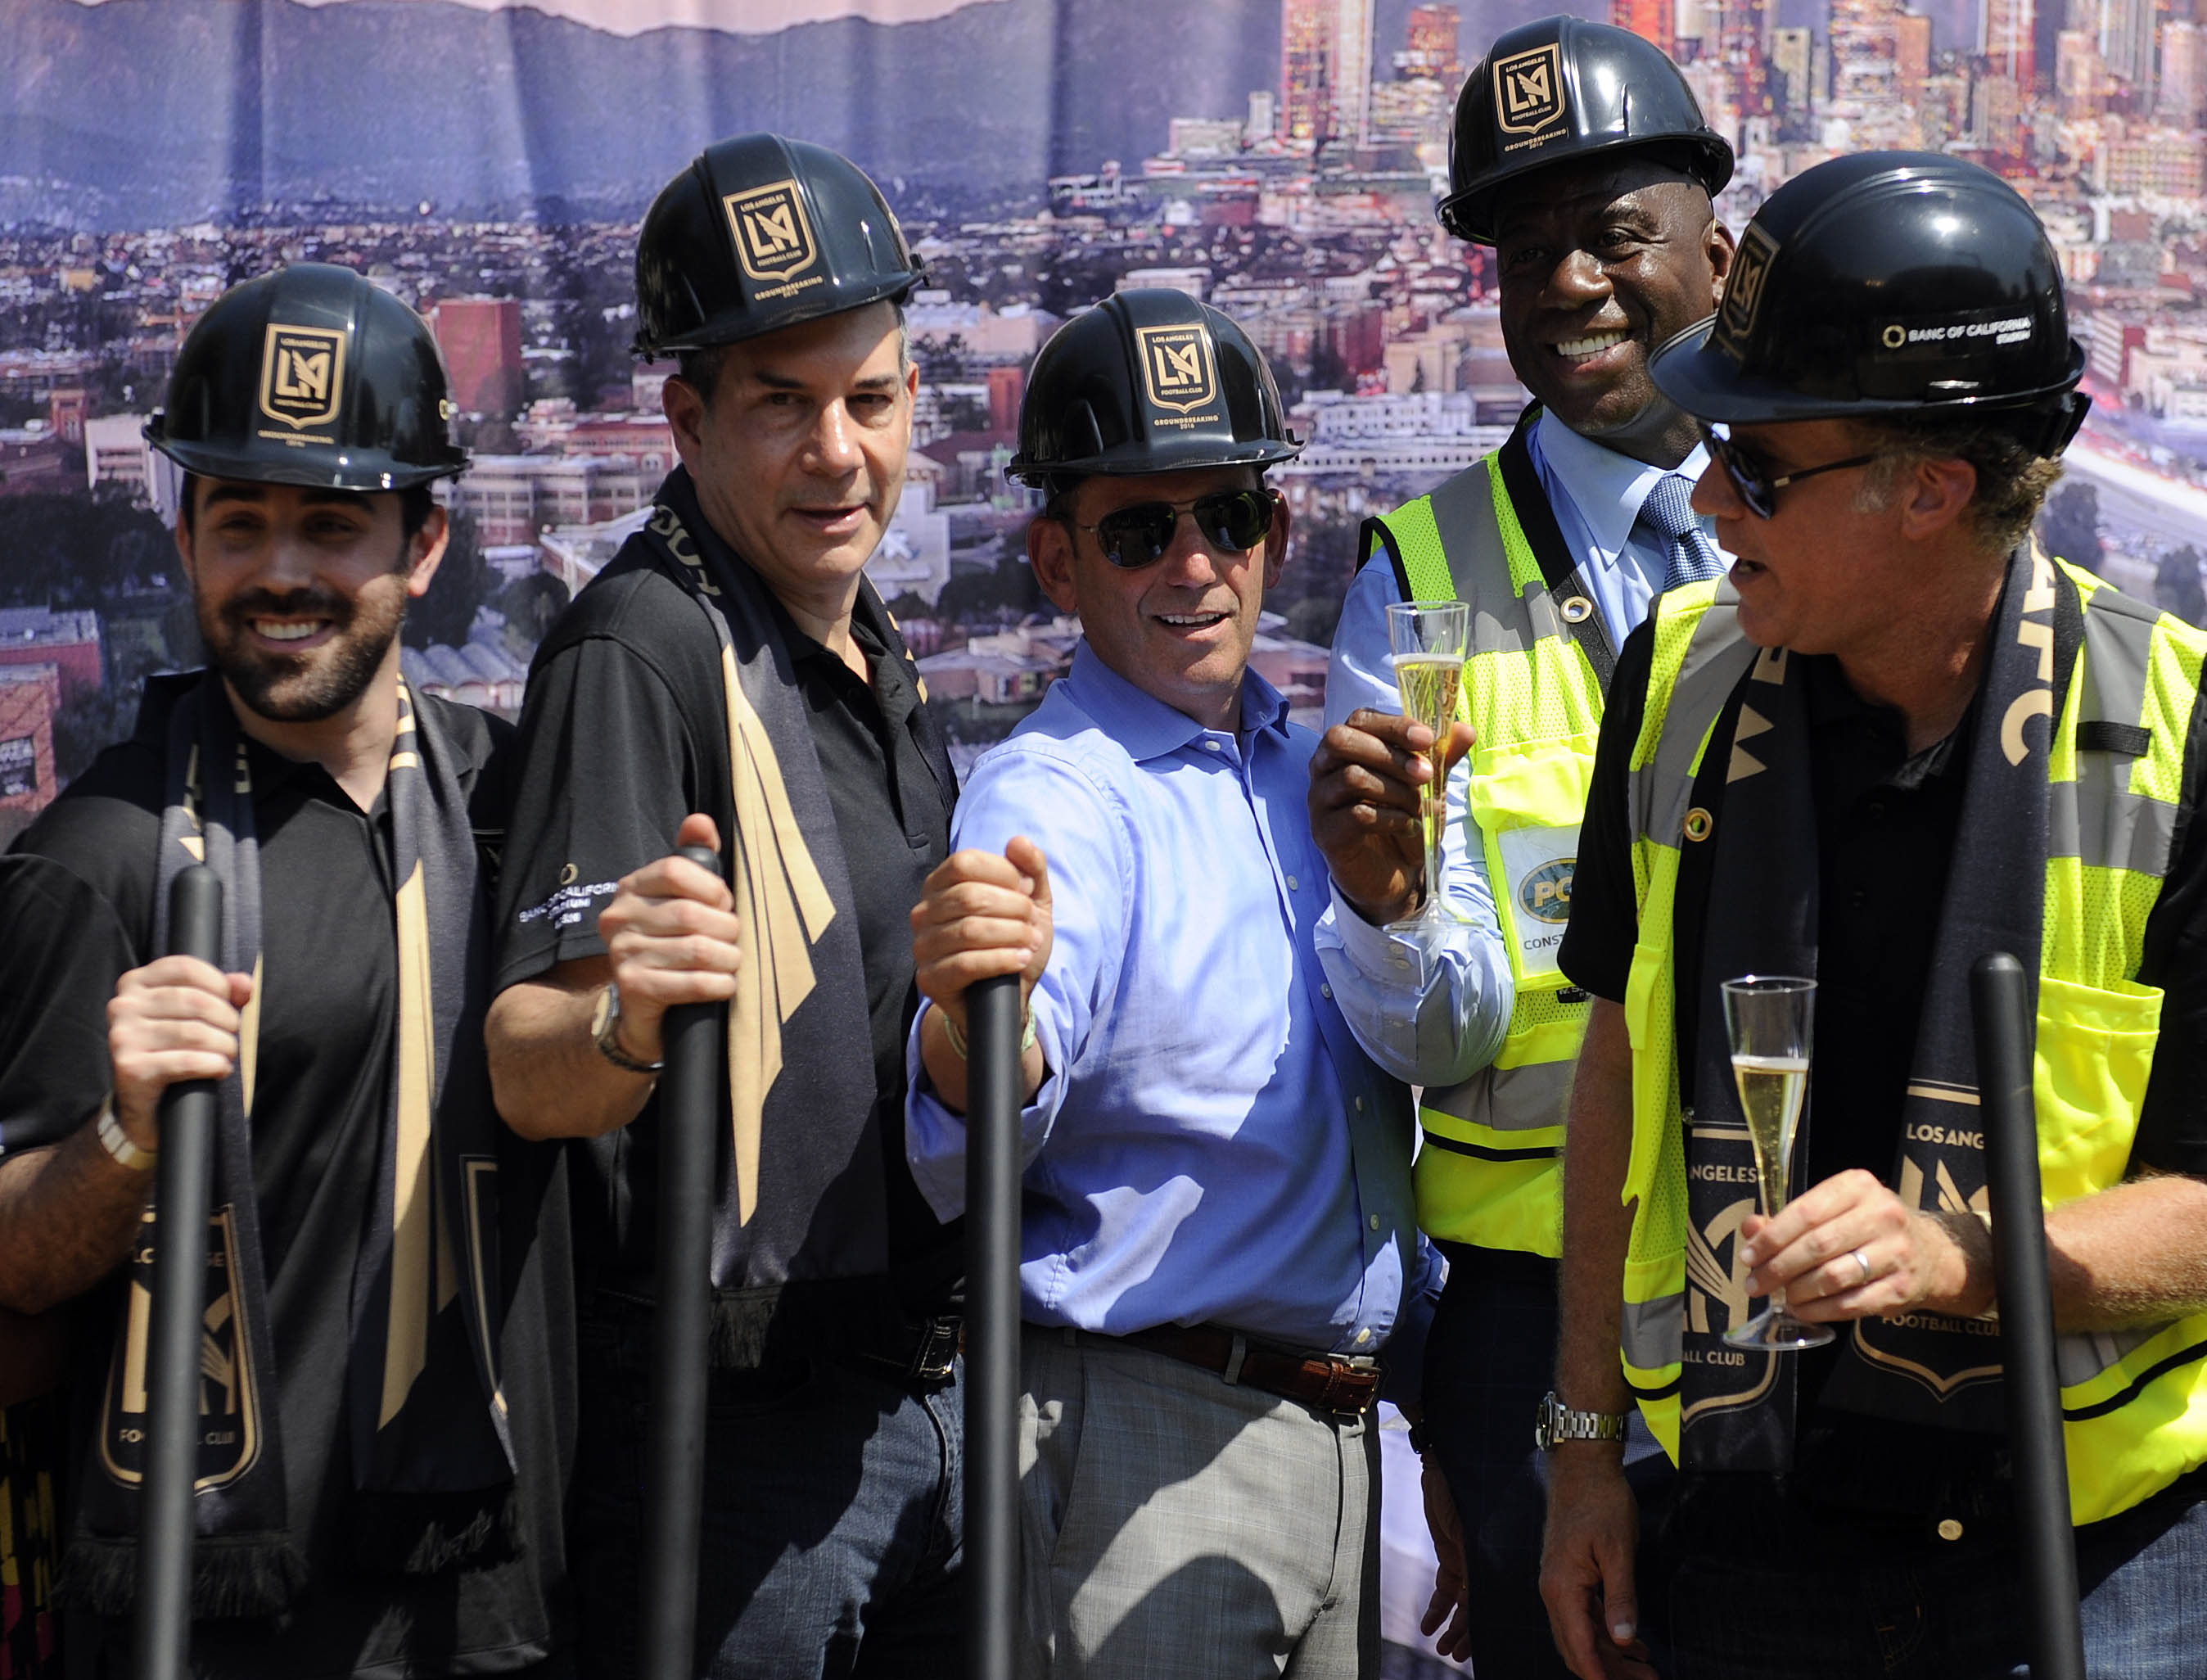 August 23, 2016; Los Angeles, CA, USA; MLS commissioner Don Garber poses for a photograph with LAFC part owners Brandon Beck, Lon Rosen, Magic Johnson and Will Ferrell at Los Angeles Football Club Stadium Site. The venue will be named Banc Of California Stadium. Mandatory Credit: Gary A. Vasquez-USA TODAY Sports